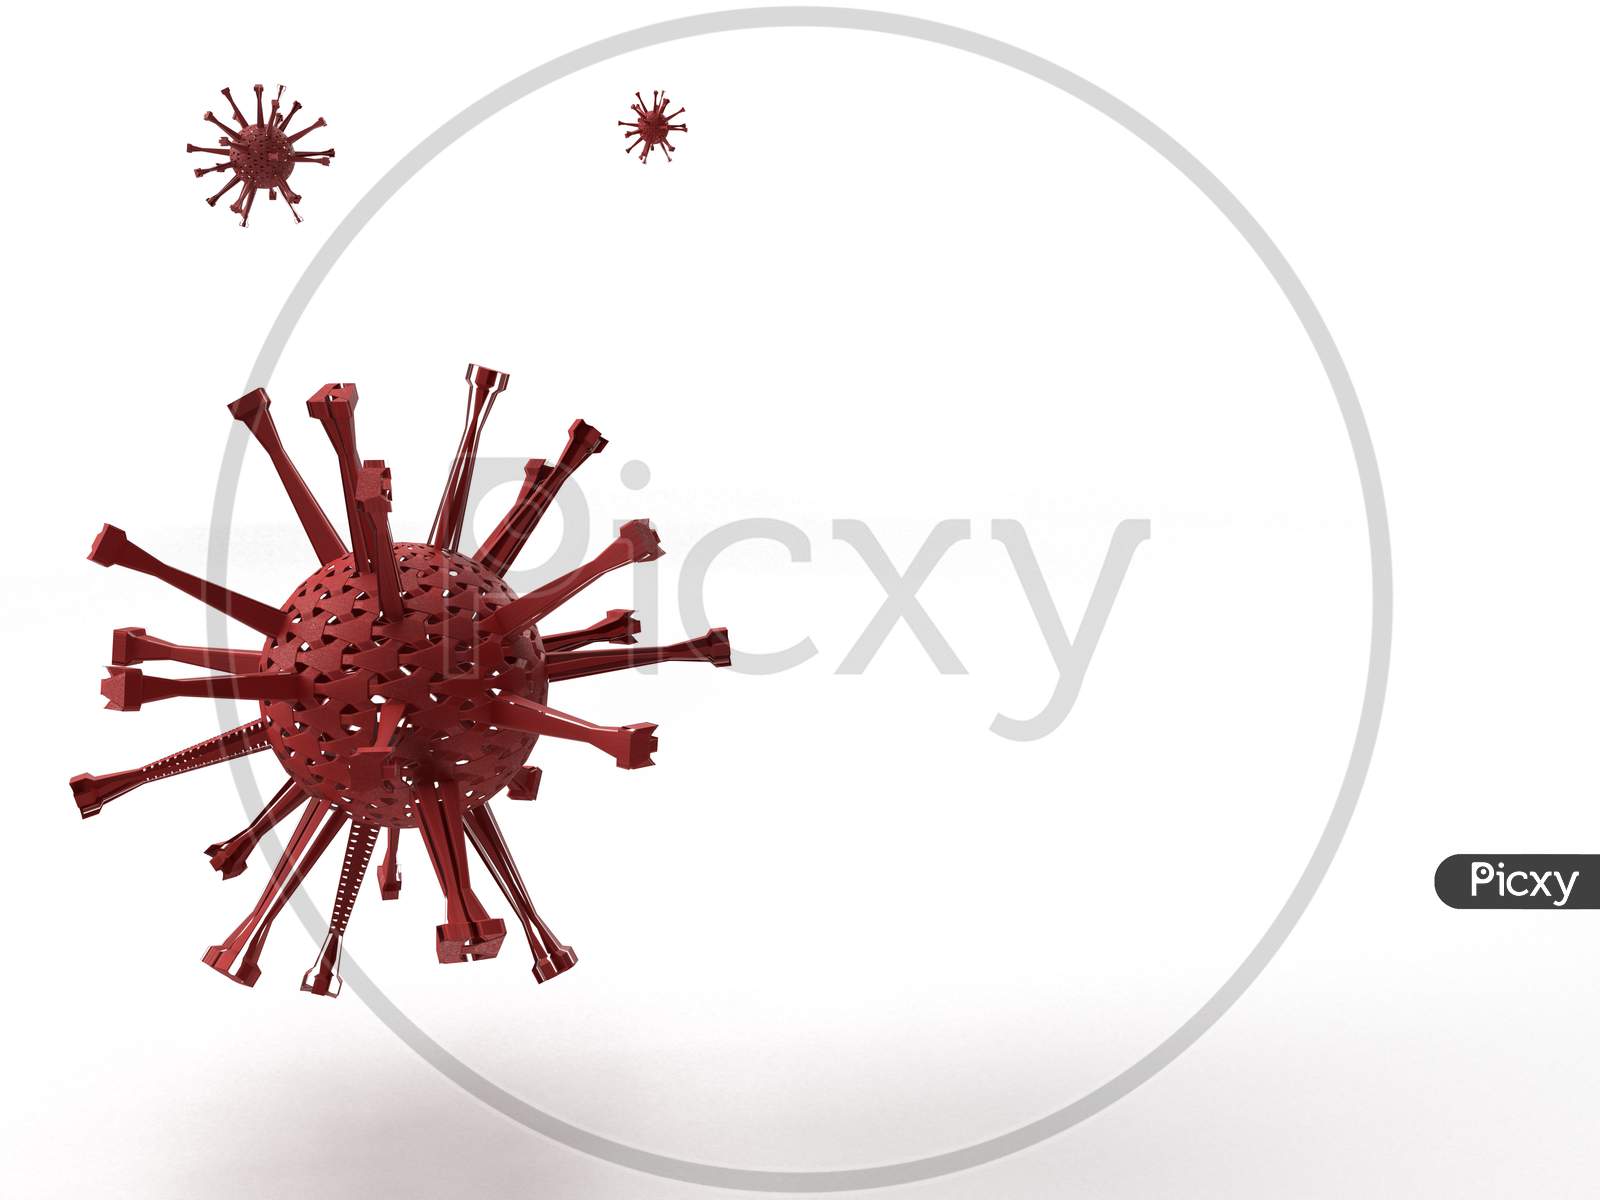 3D Render Of Red Coronavirus Model In White Background With Space For Text.